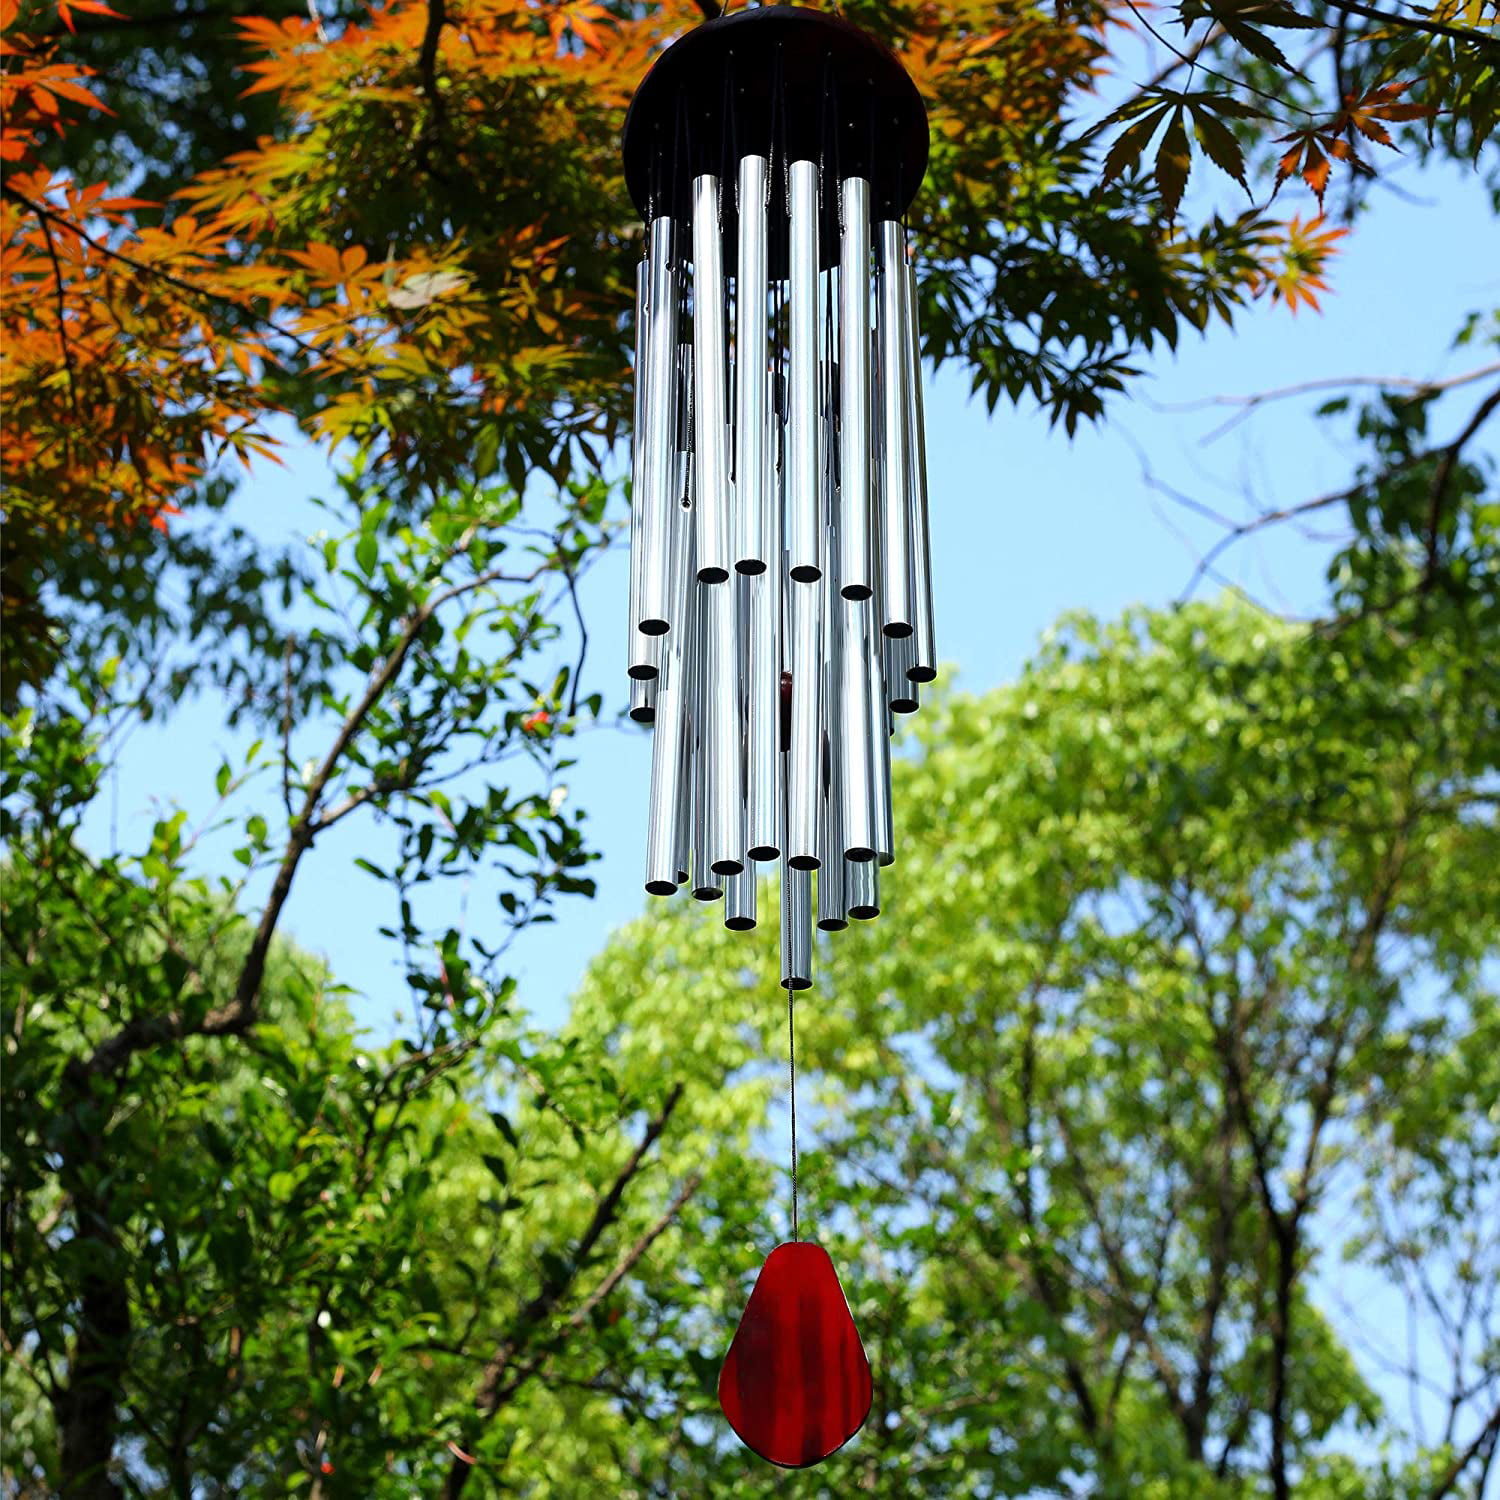 Wind Chimes Outdoor Large Deep Tone 31 Inches Memorial Wind Chimes with 27 Tubes 